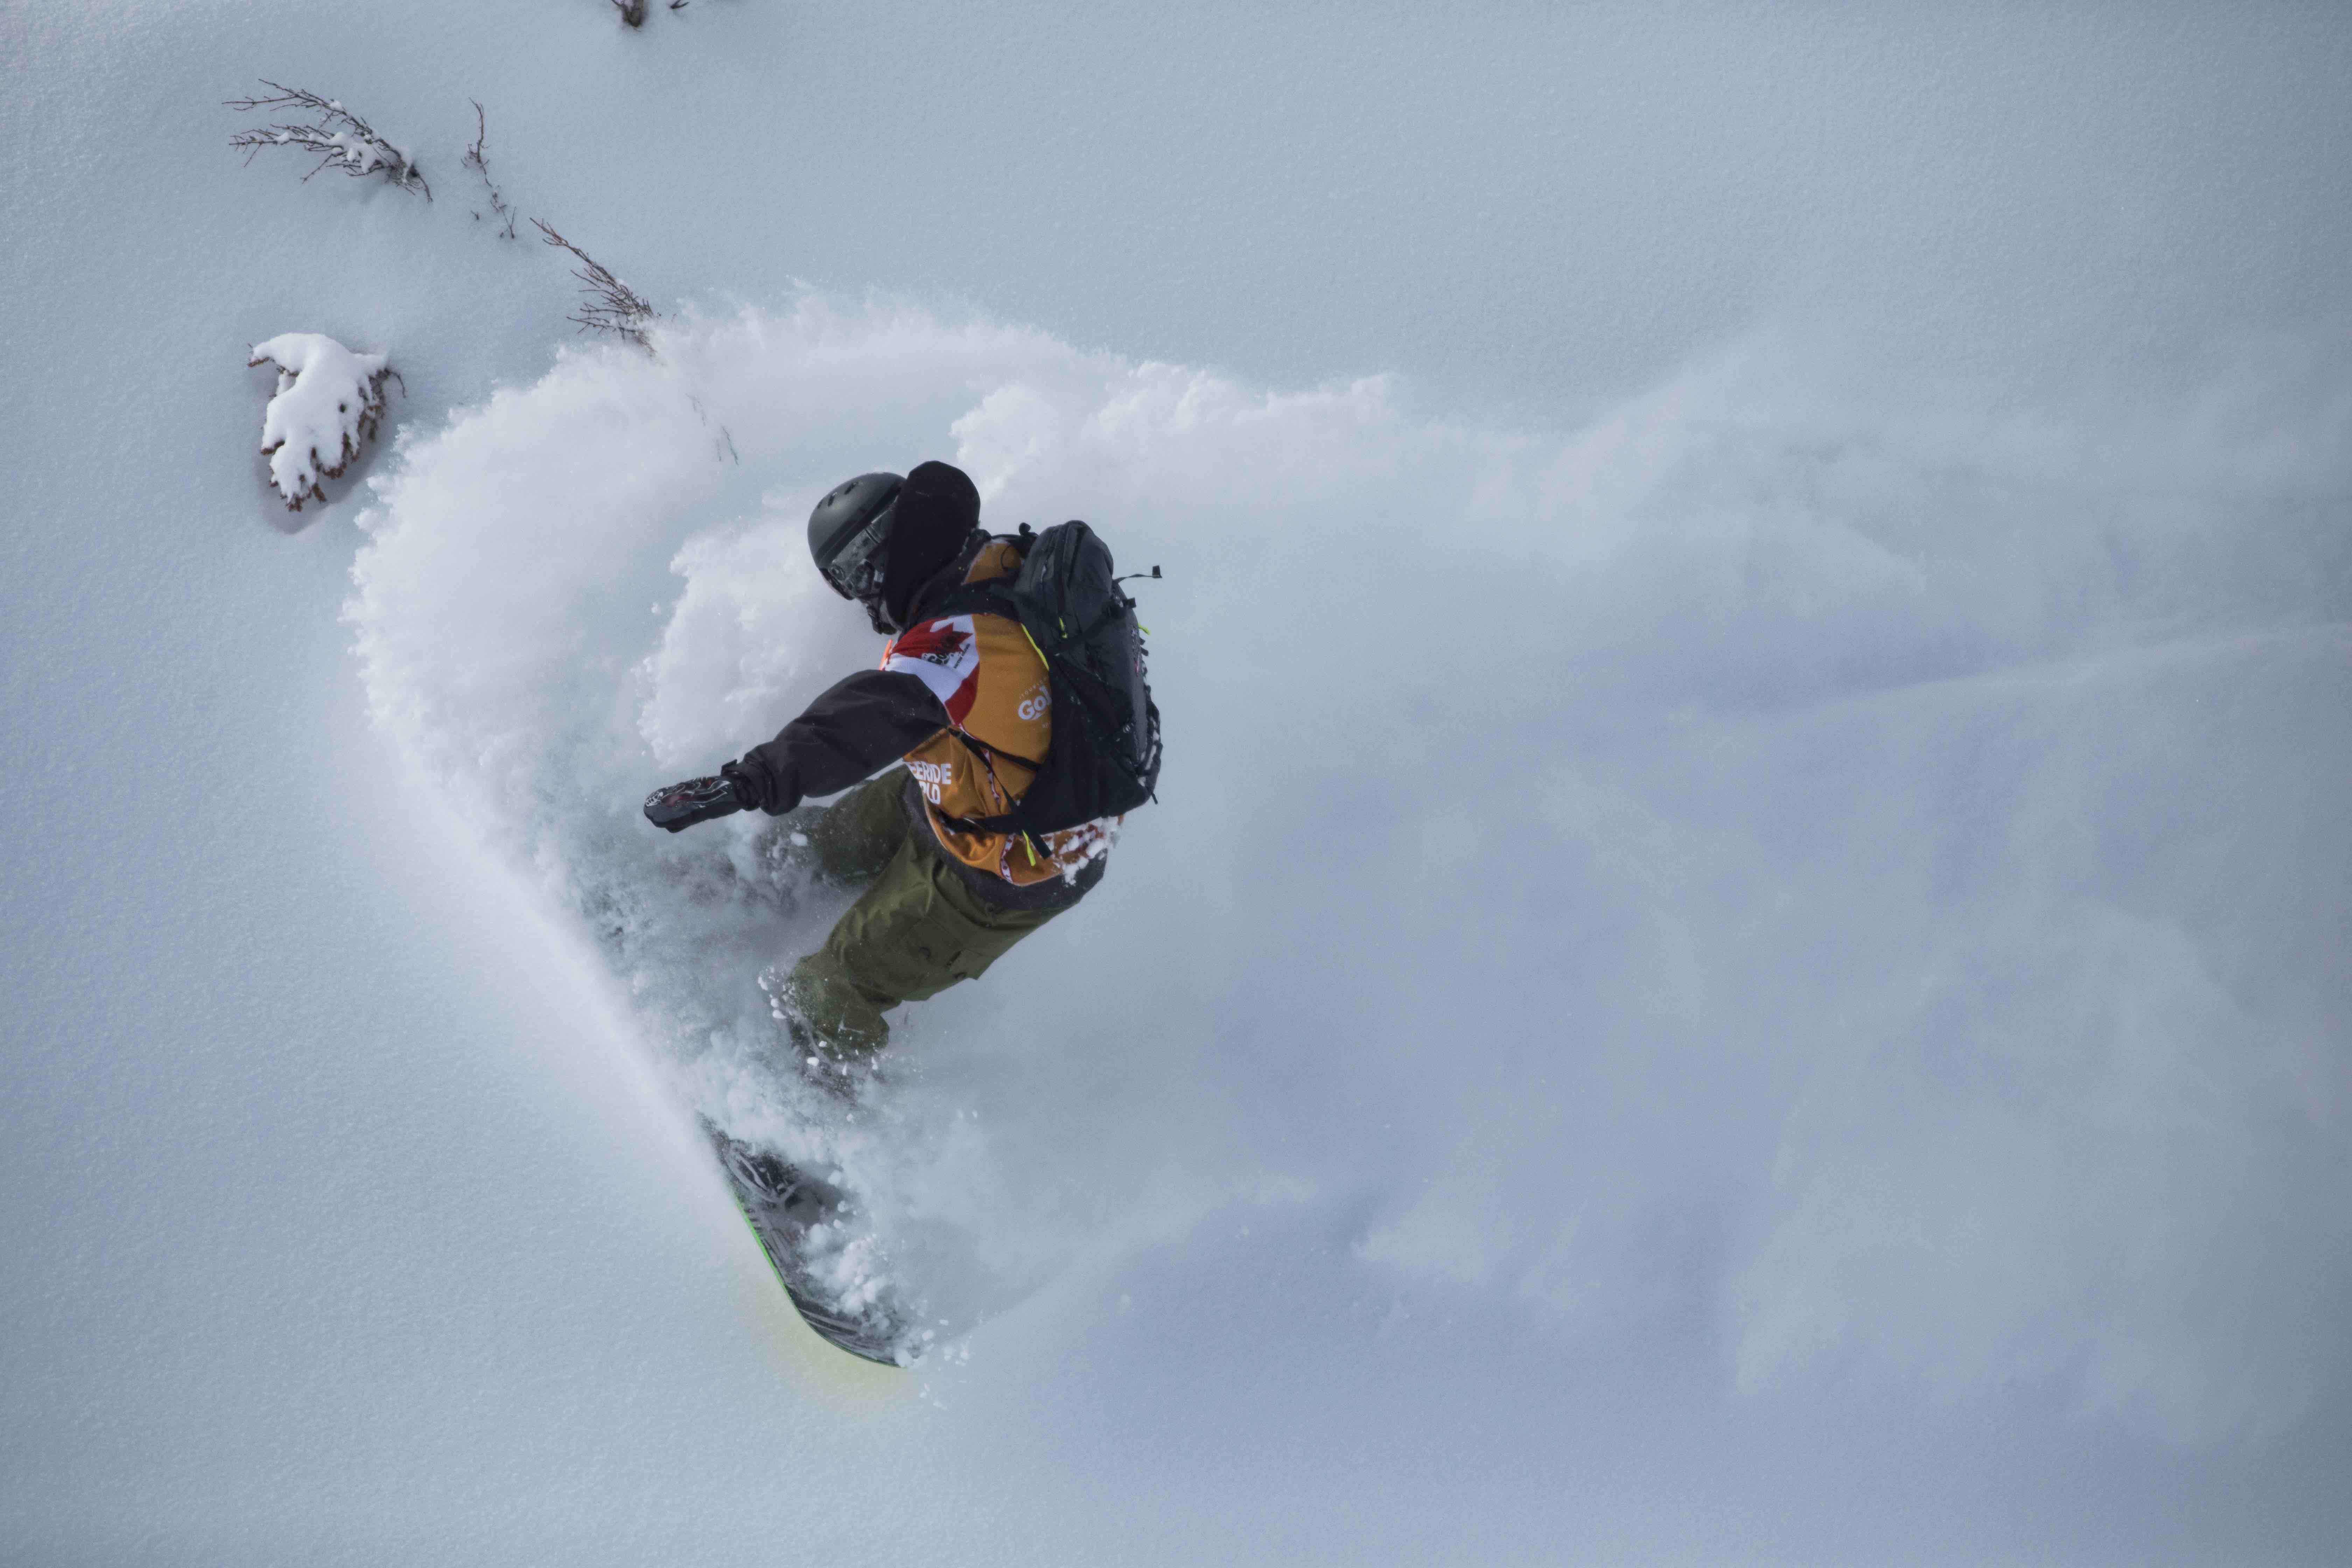 Freeride World Tour 2019 - Kicking Horse, Golden BC (CAN)